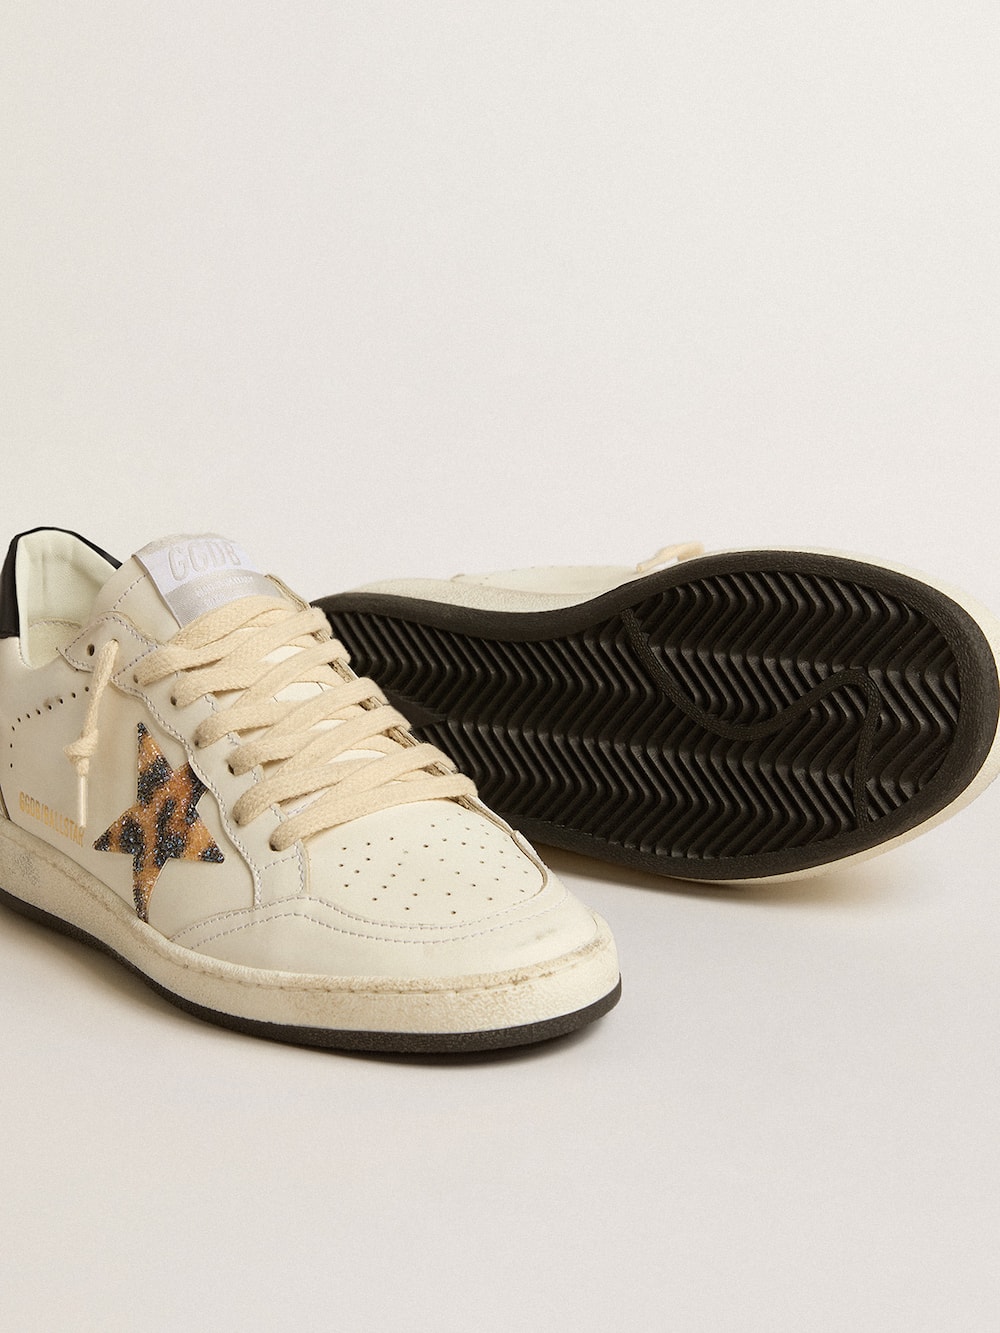 Golden Goose - Women’s Ball Star with leopard-print star embellished with Swarovski crystal in 